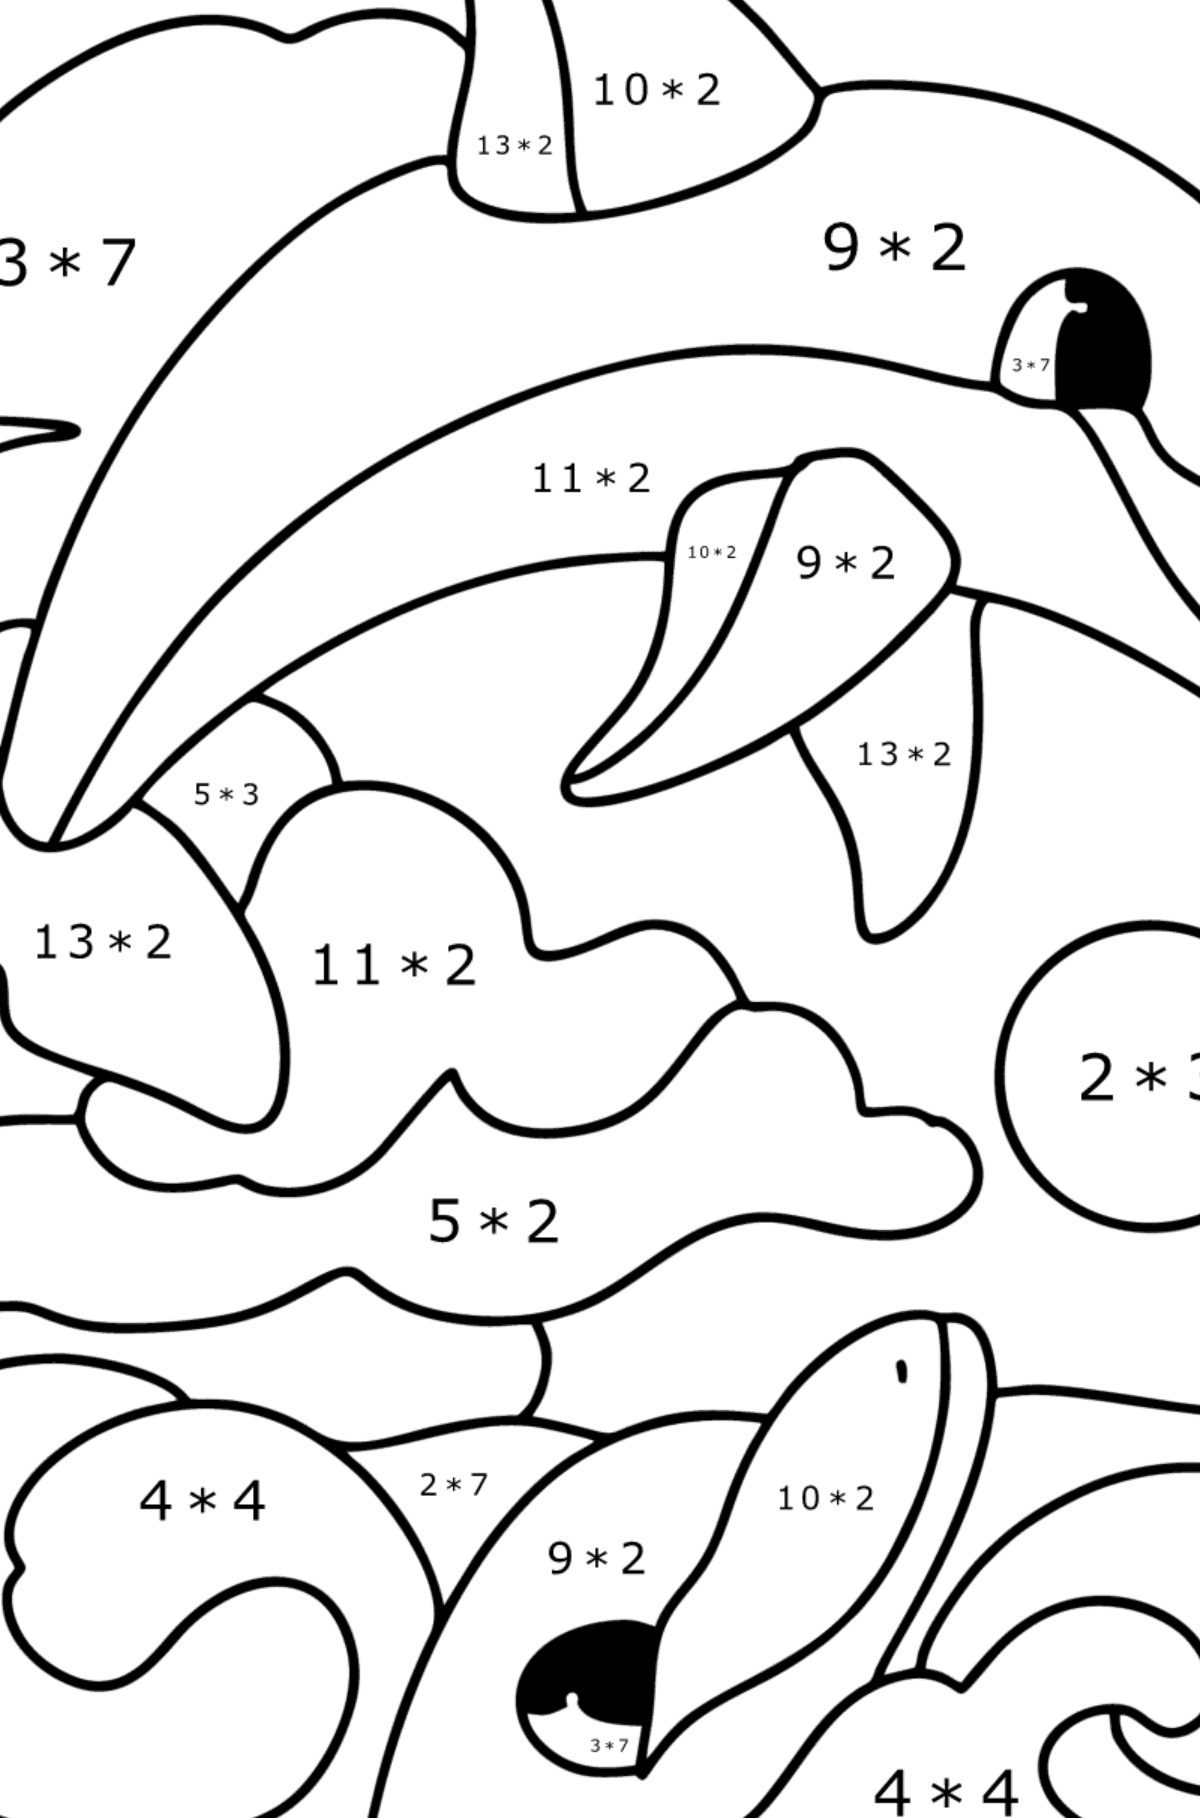 Dolphins coloring page - Math Coloring - Multiplication for Kids